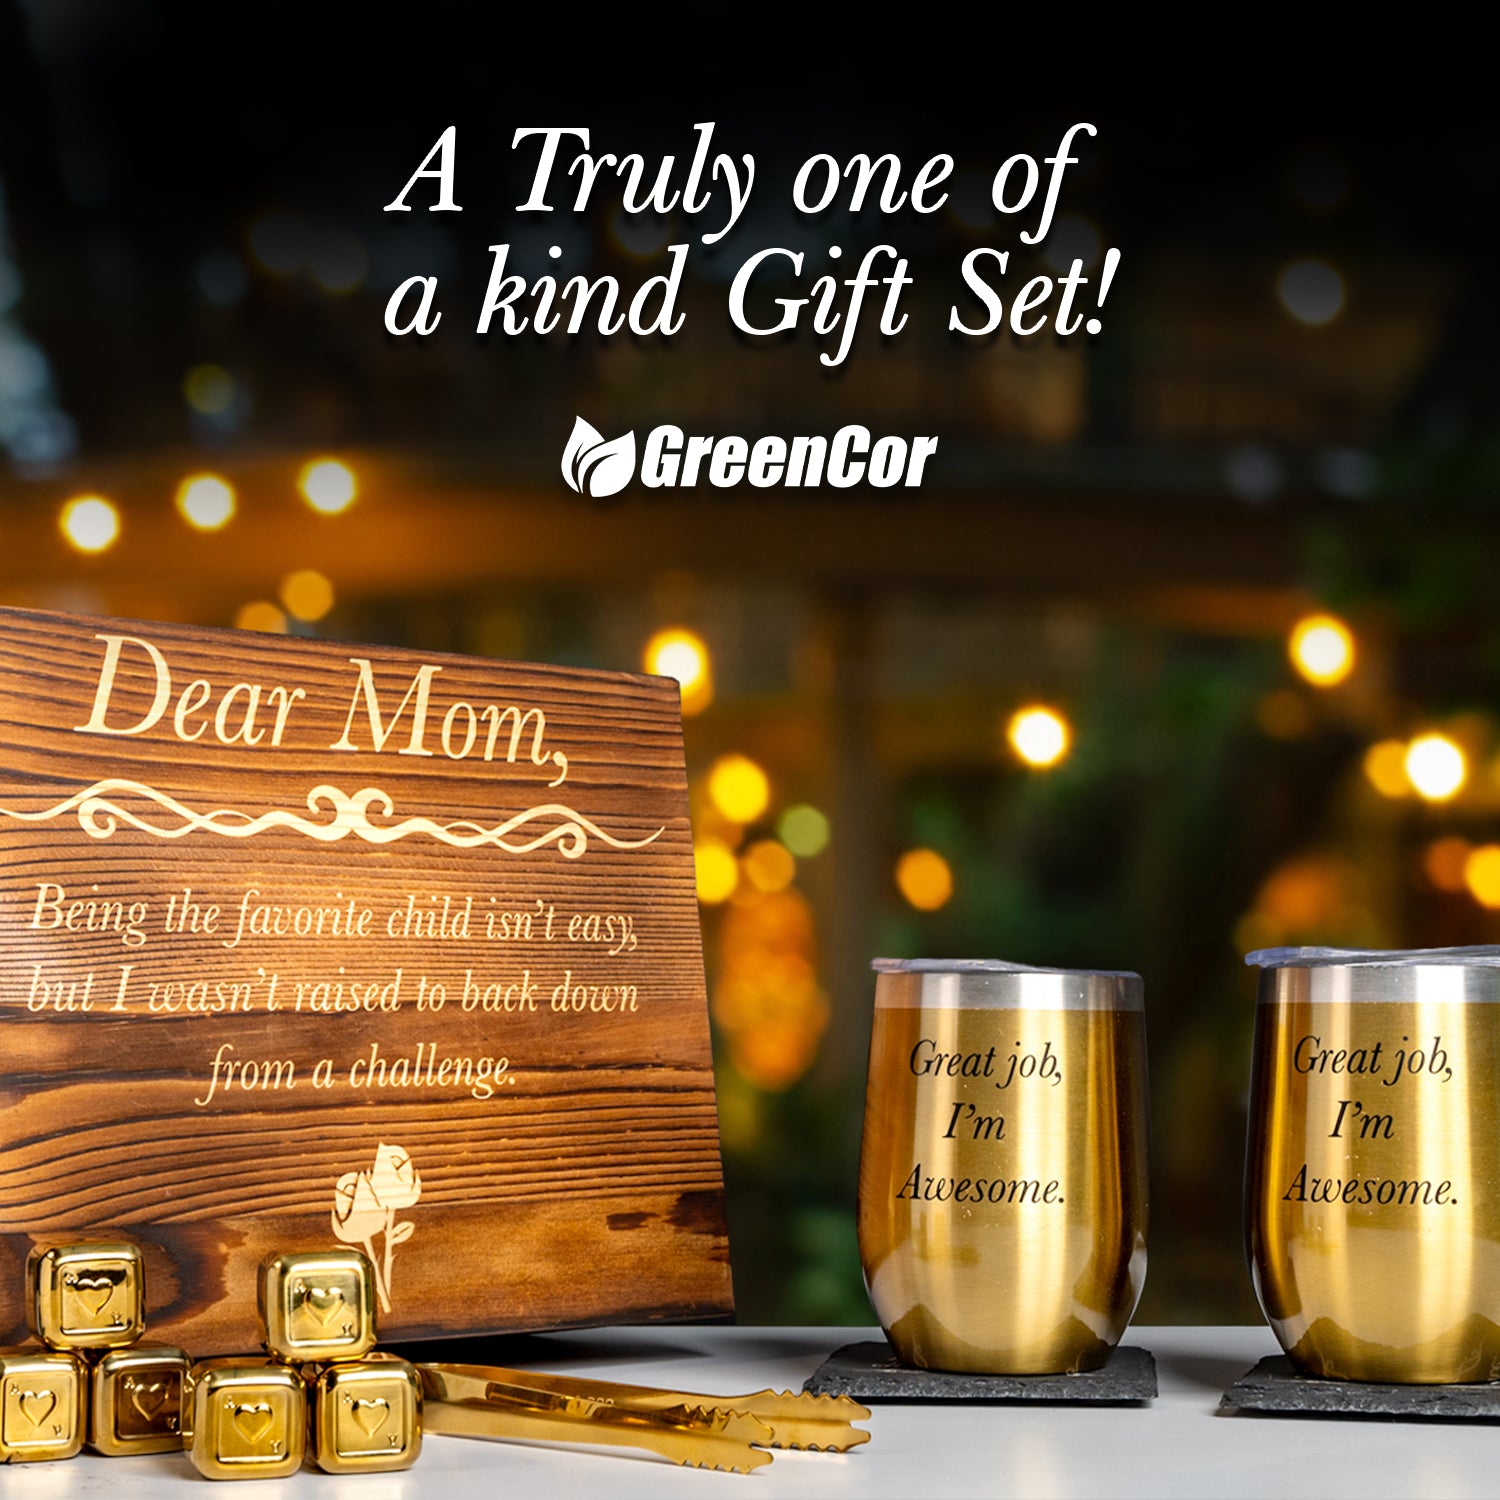 The Perfect Gift For Your Mom - "Dear Mom" Wine Tumbler Gift Set